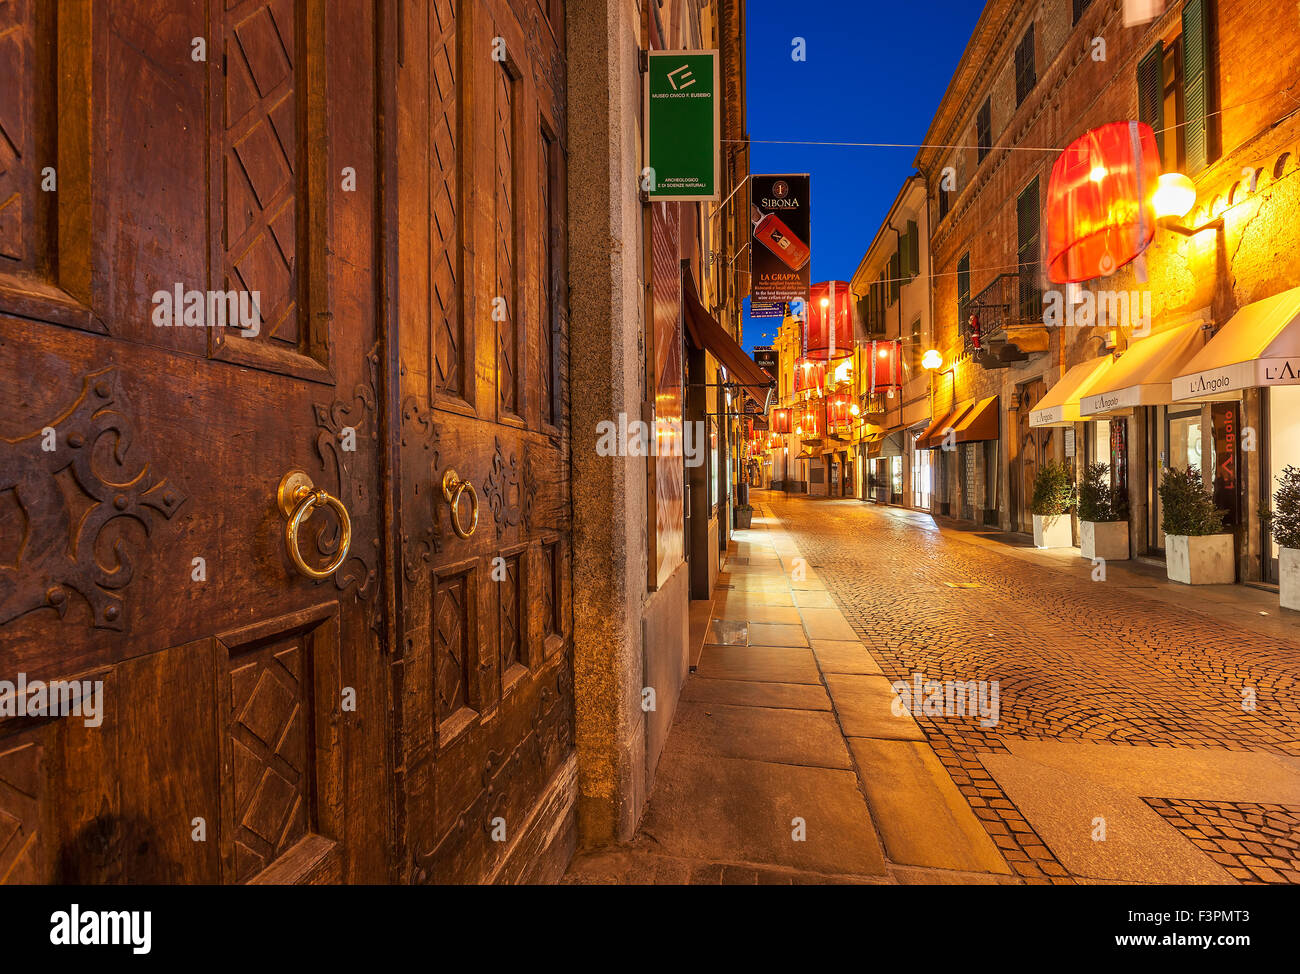 Old wooden door and pedestrian street with shops in old town of Alba, Italy. Stock Photo